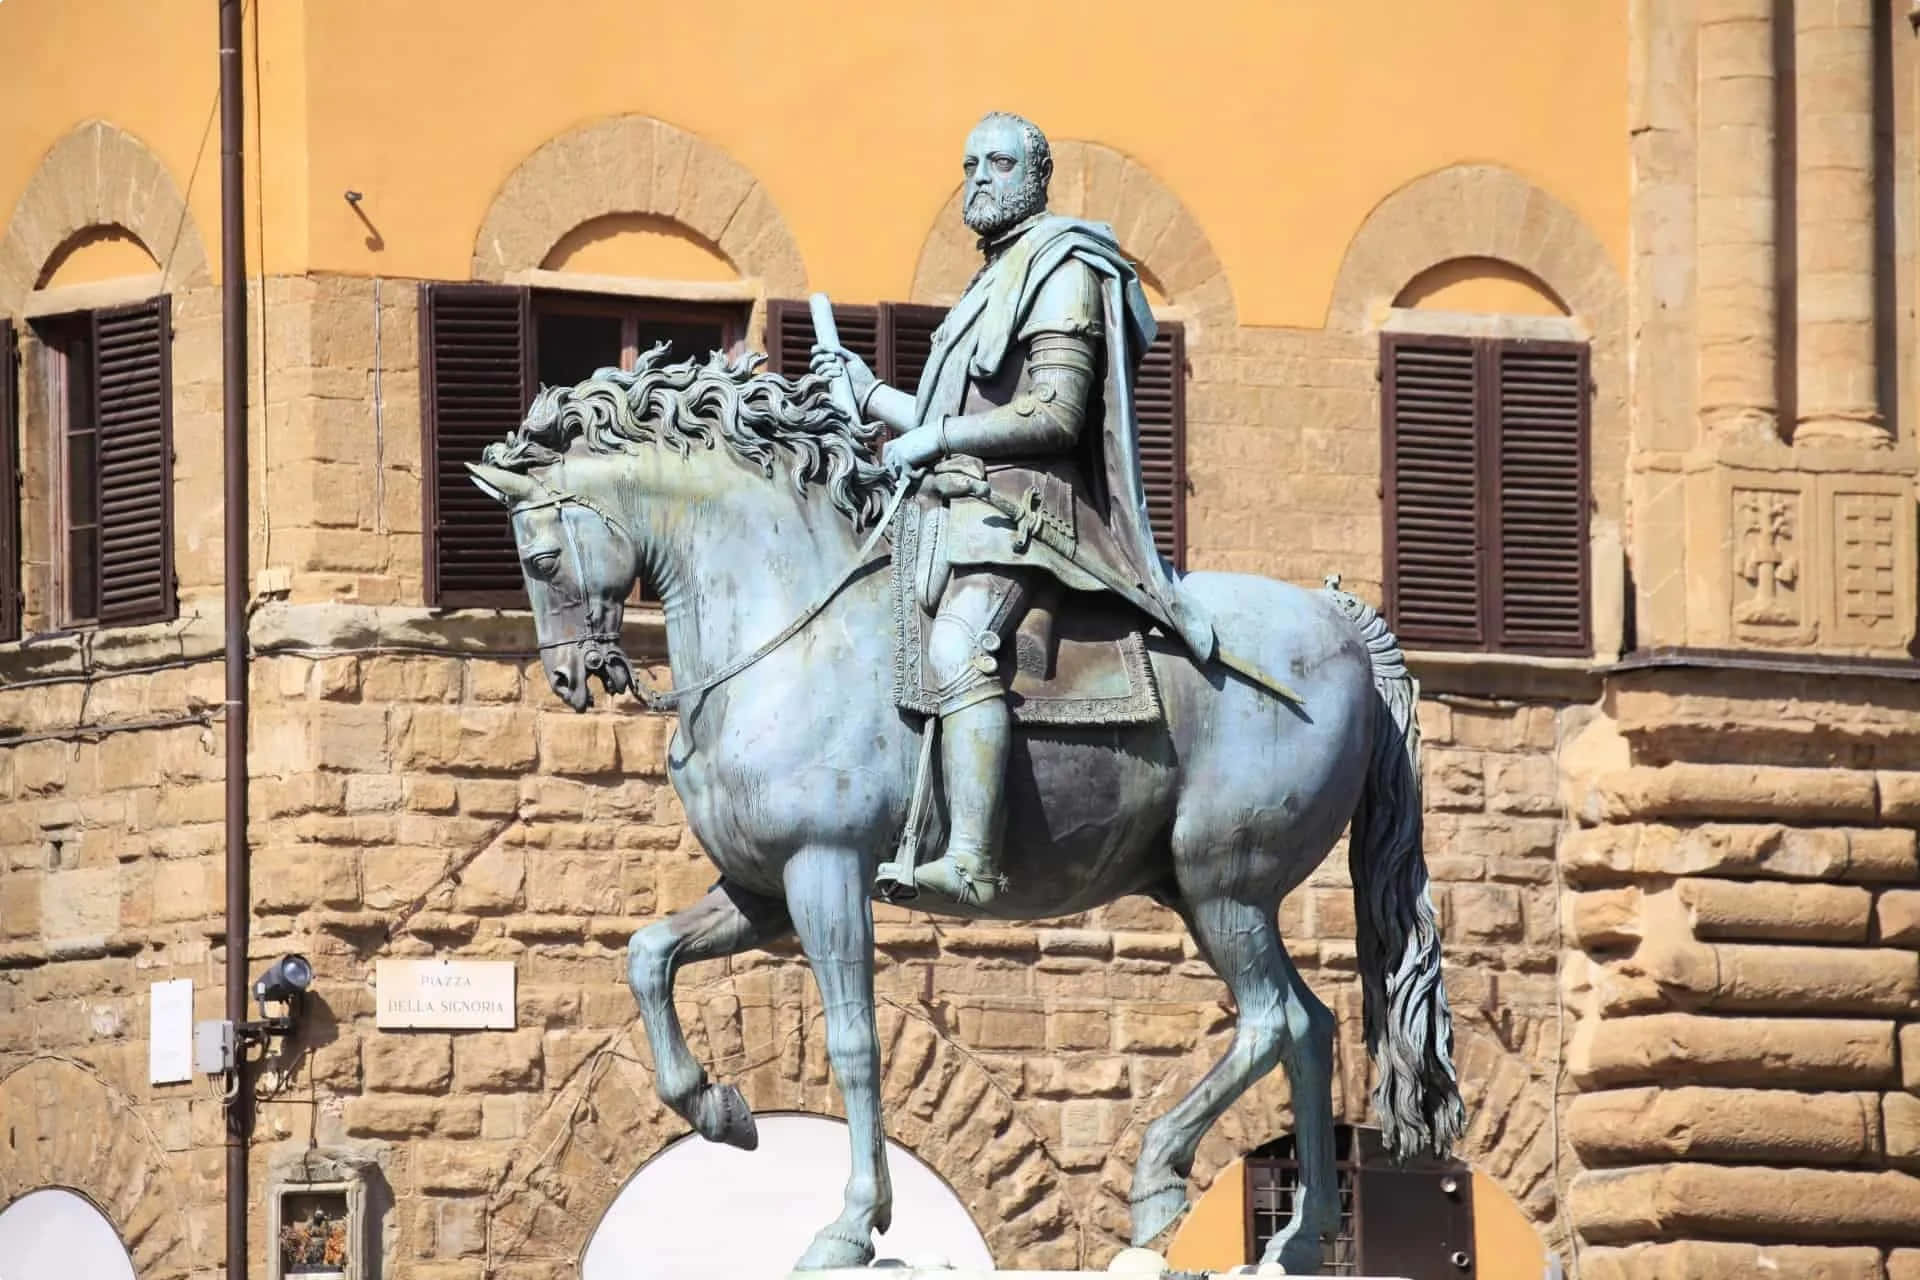 A Statue Of A Man On A Horse In Front Of A Building